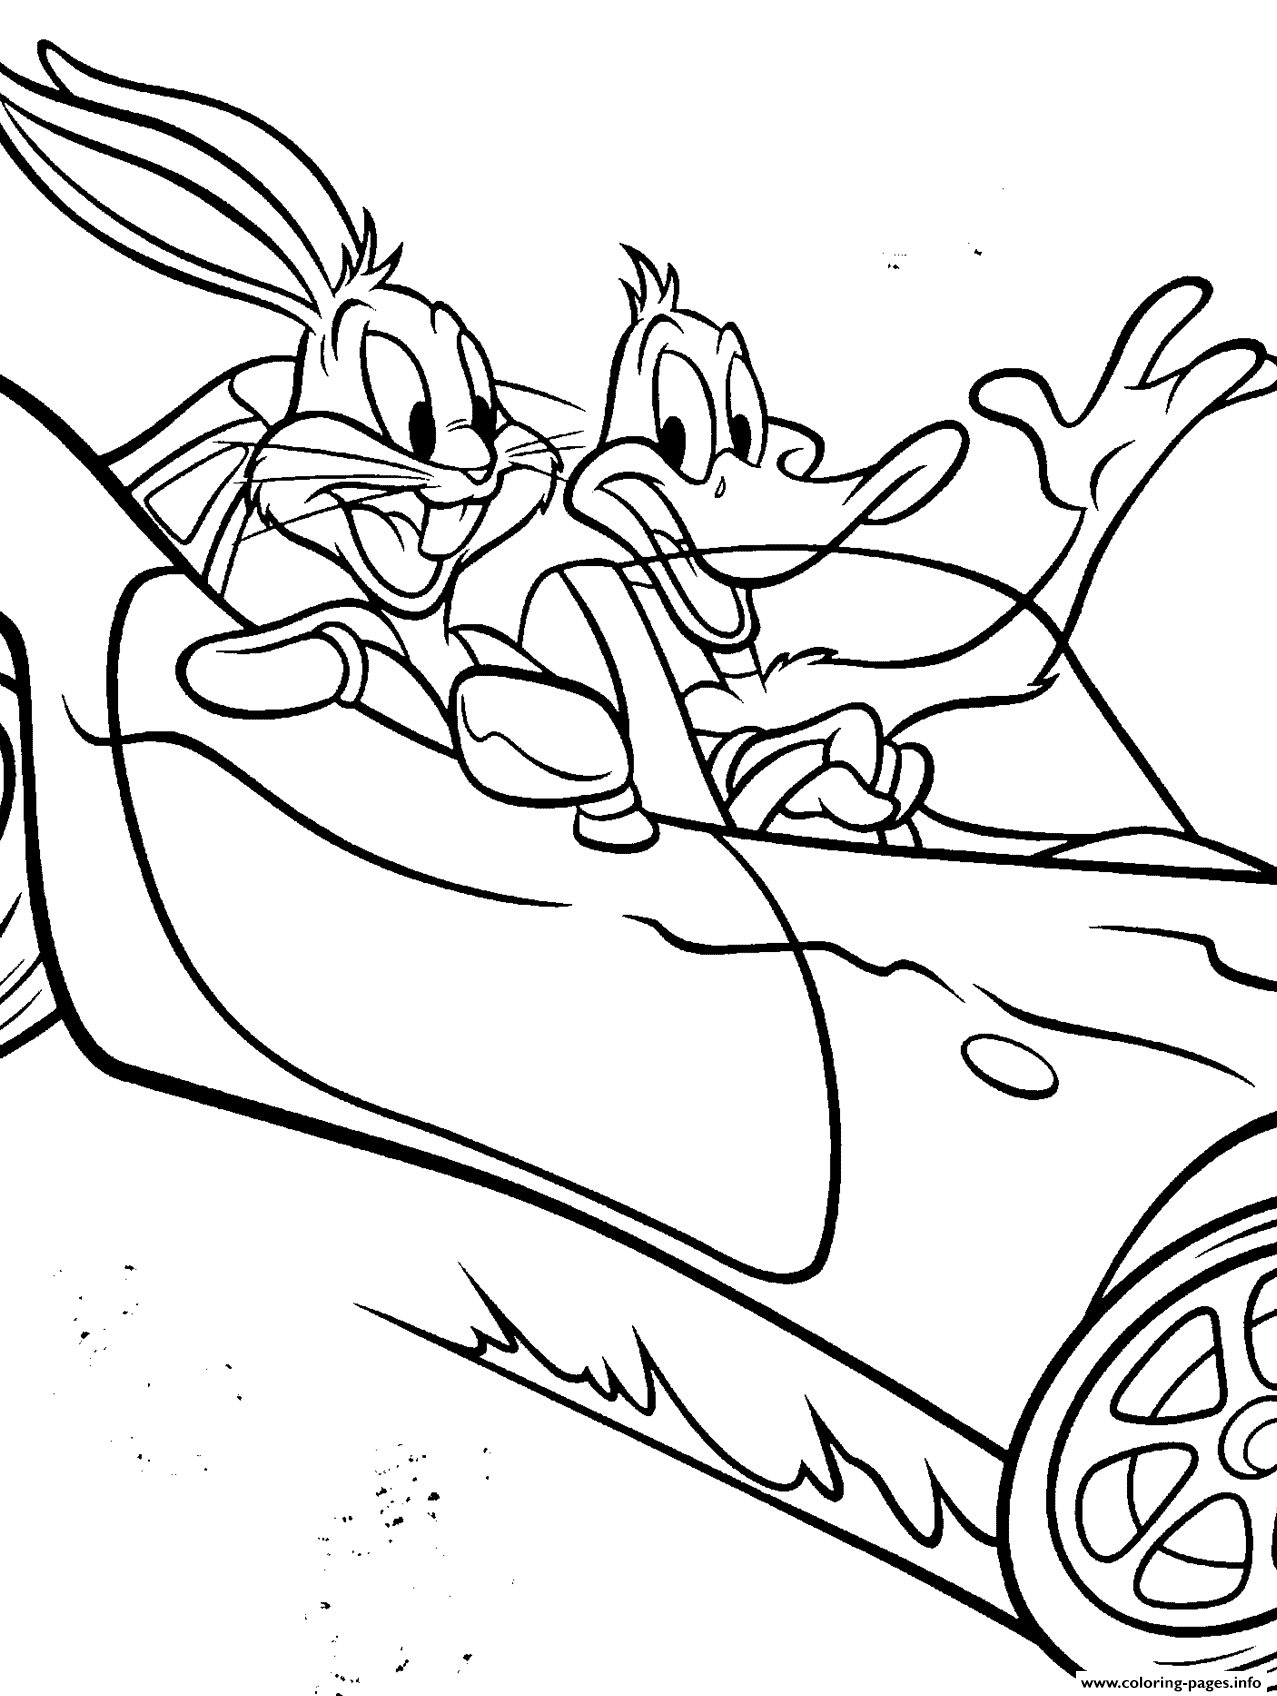 Daffy Duck And Bugs Bunny Pictures Of Looney Tunes S44cb coloring